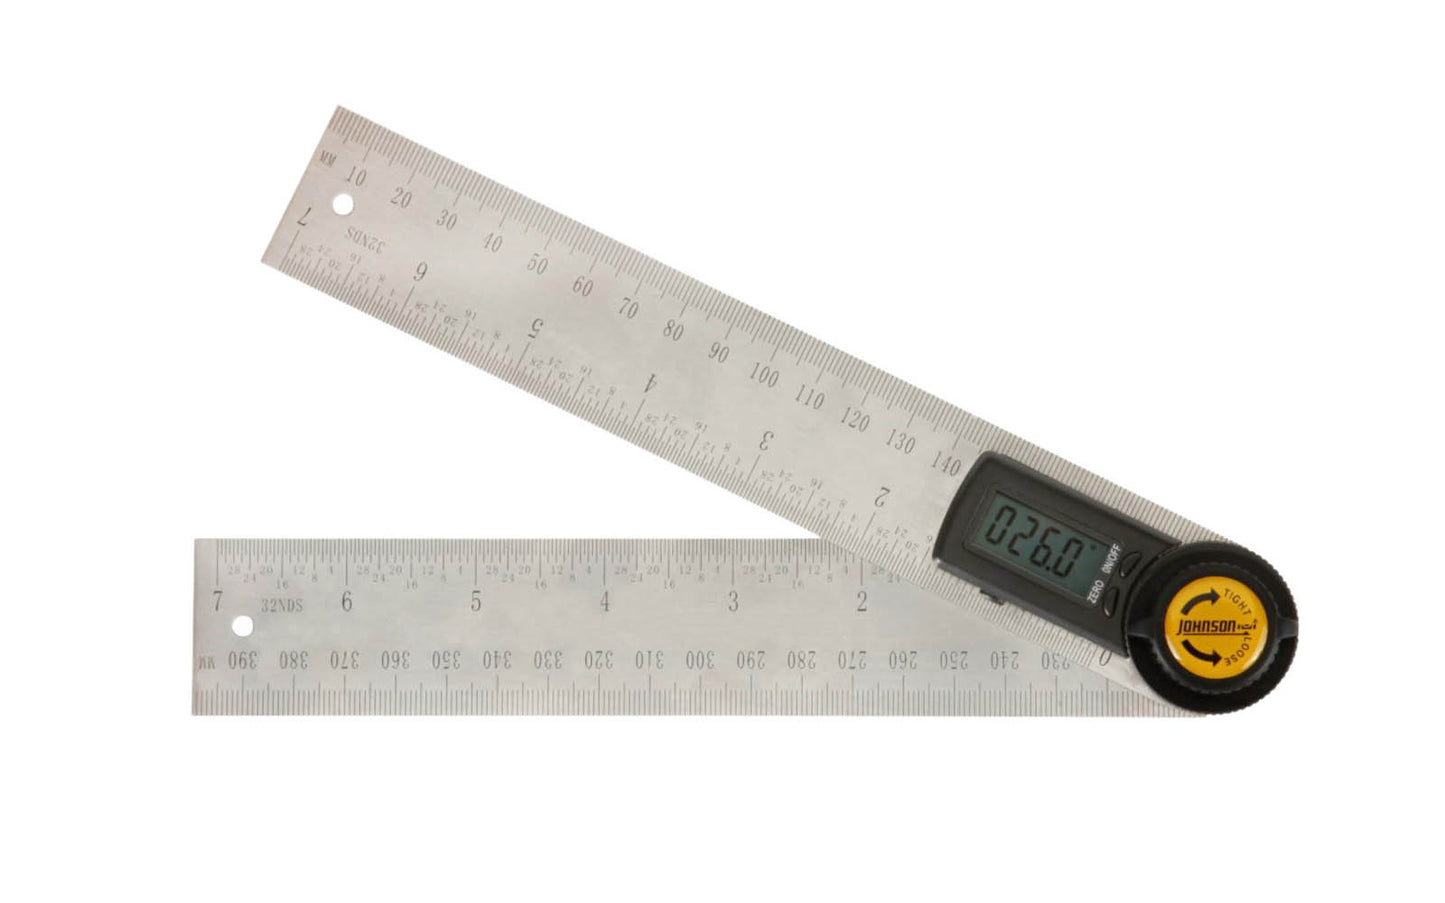 Check & transfer angle measurements & have a ready straight edge all in one tool. Compact 7" digital angle locator & ruler is made of durable stainless steel. The digital angle locator displays measurements digitally in degrees on an easy-to-read LCD display. Johnson Level Model 1888-0700. 1/32nds & mm graduations.